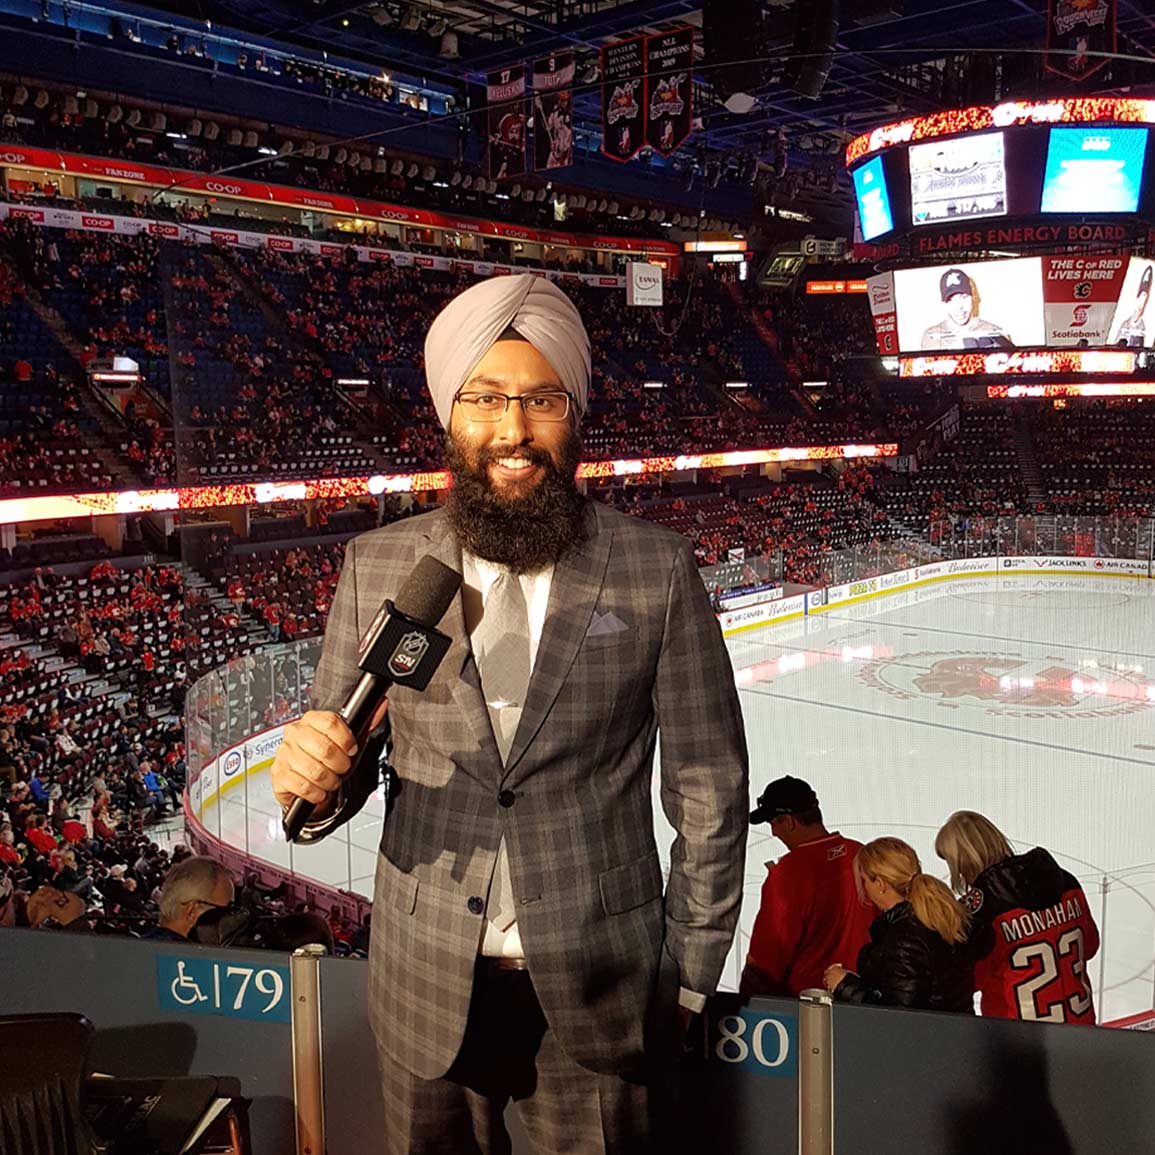 His heart is so big”: Harnarayan Singh on surprising Kelly Hrudey with  heartfelt on-air moment